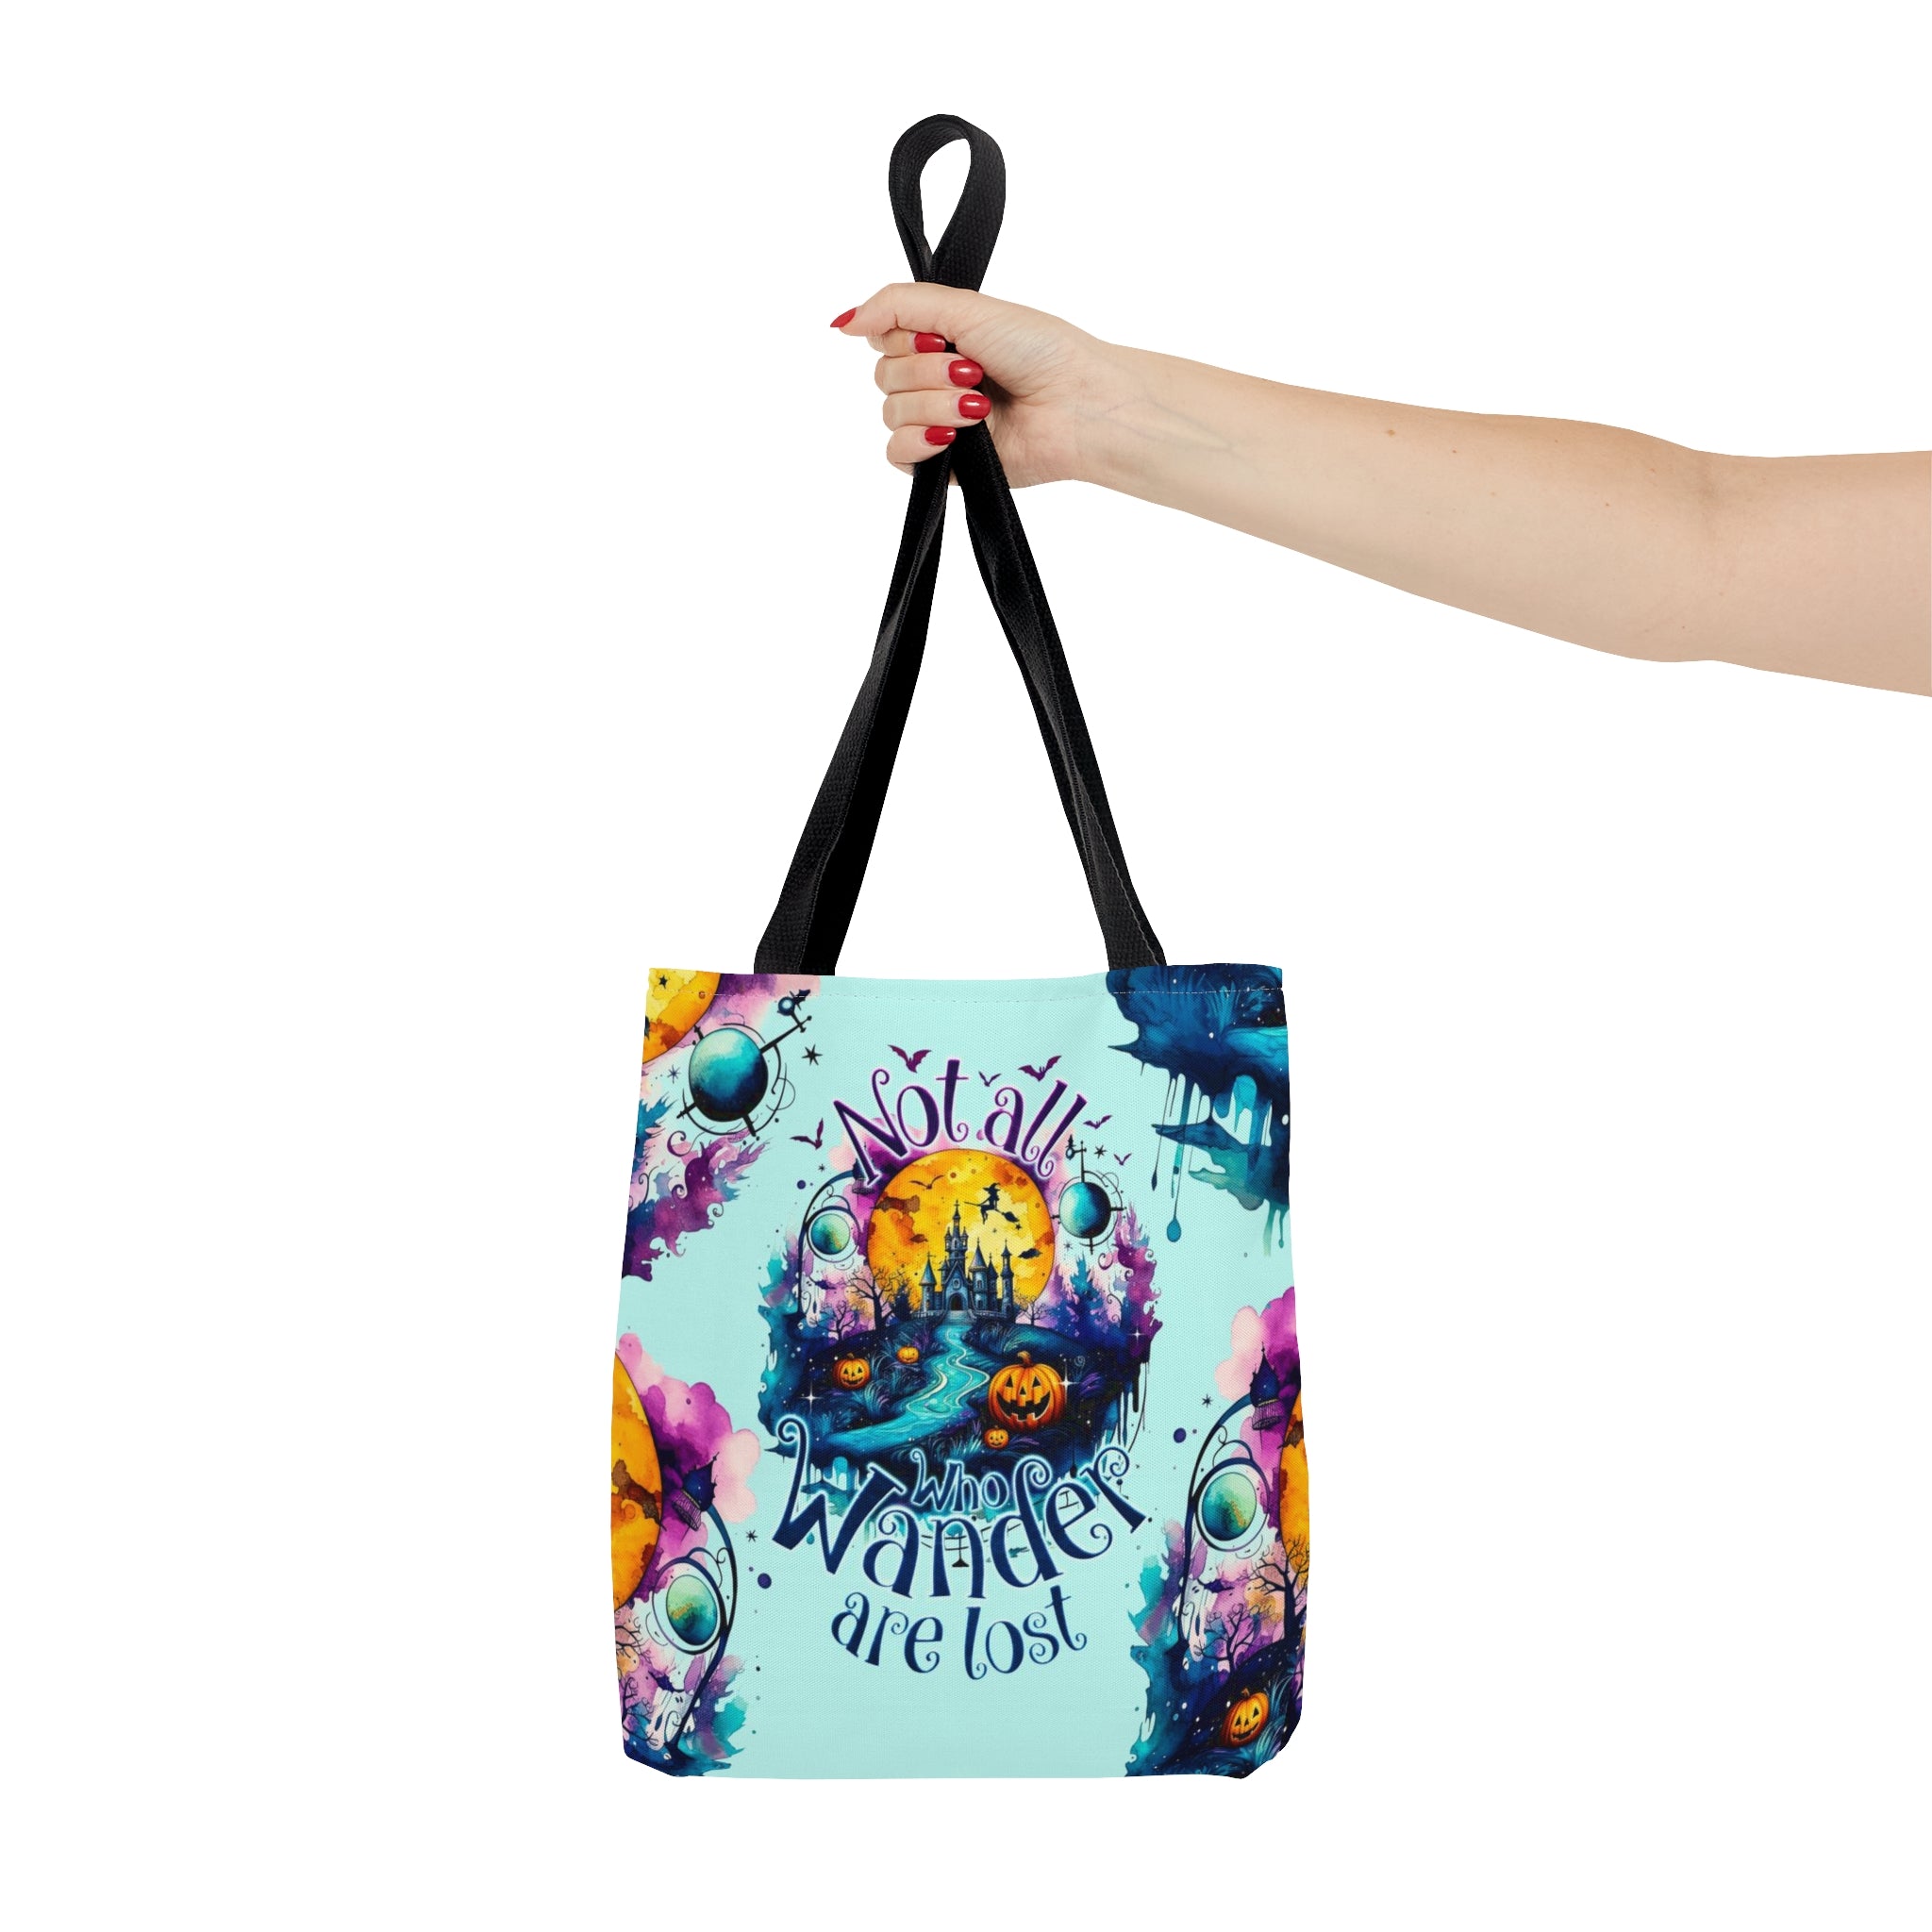 NOT ALL WHO WANDER ARE LOST HALLOWEEN TOTE BAG - TY1008233